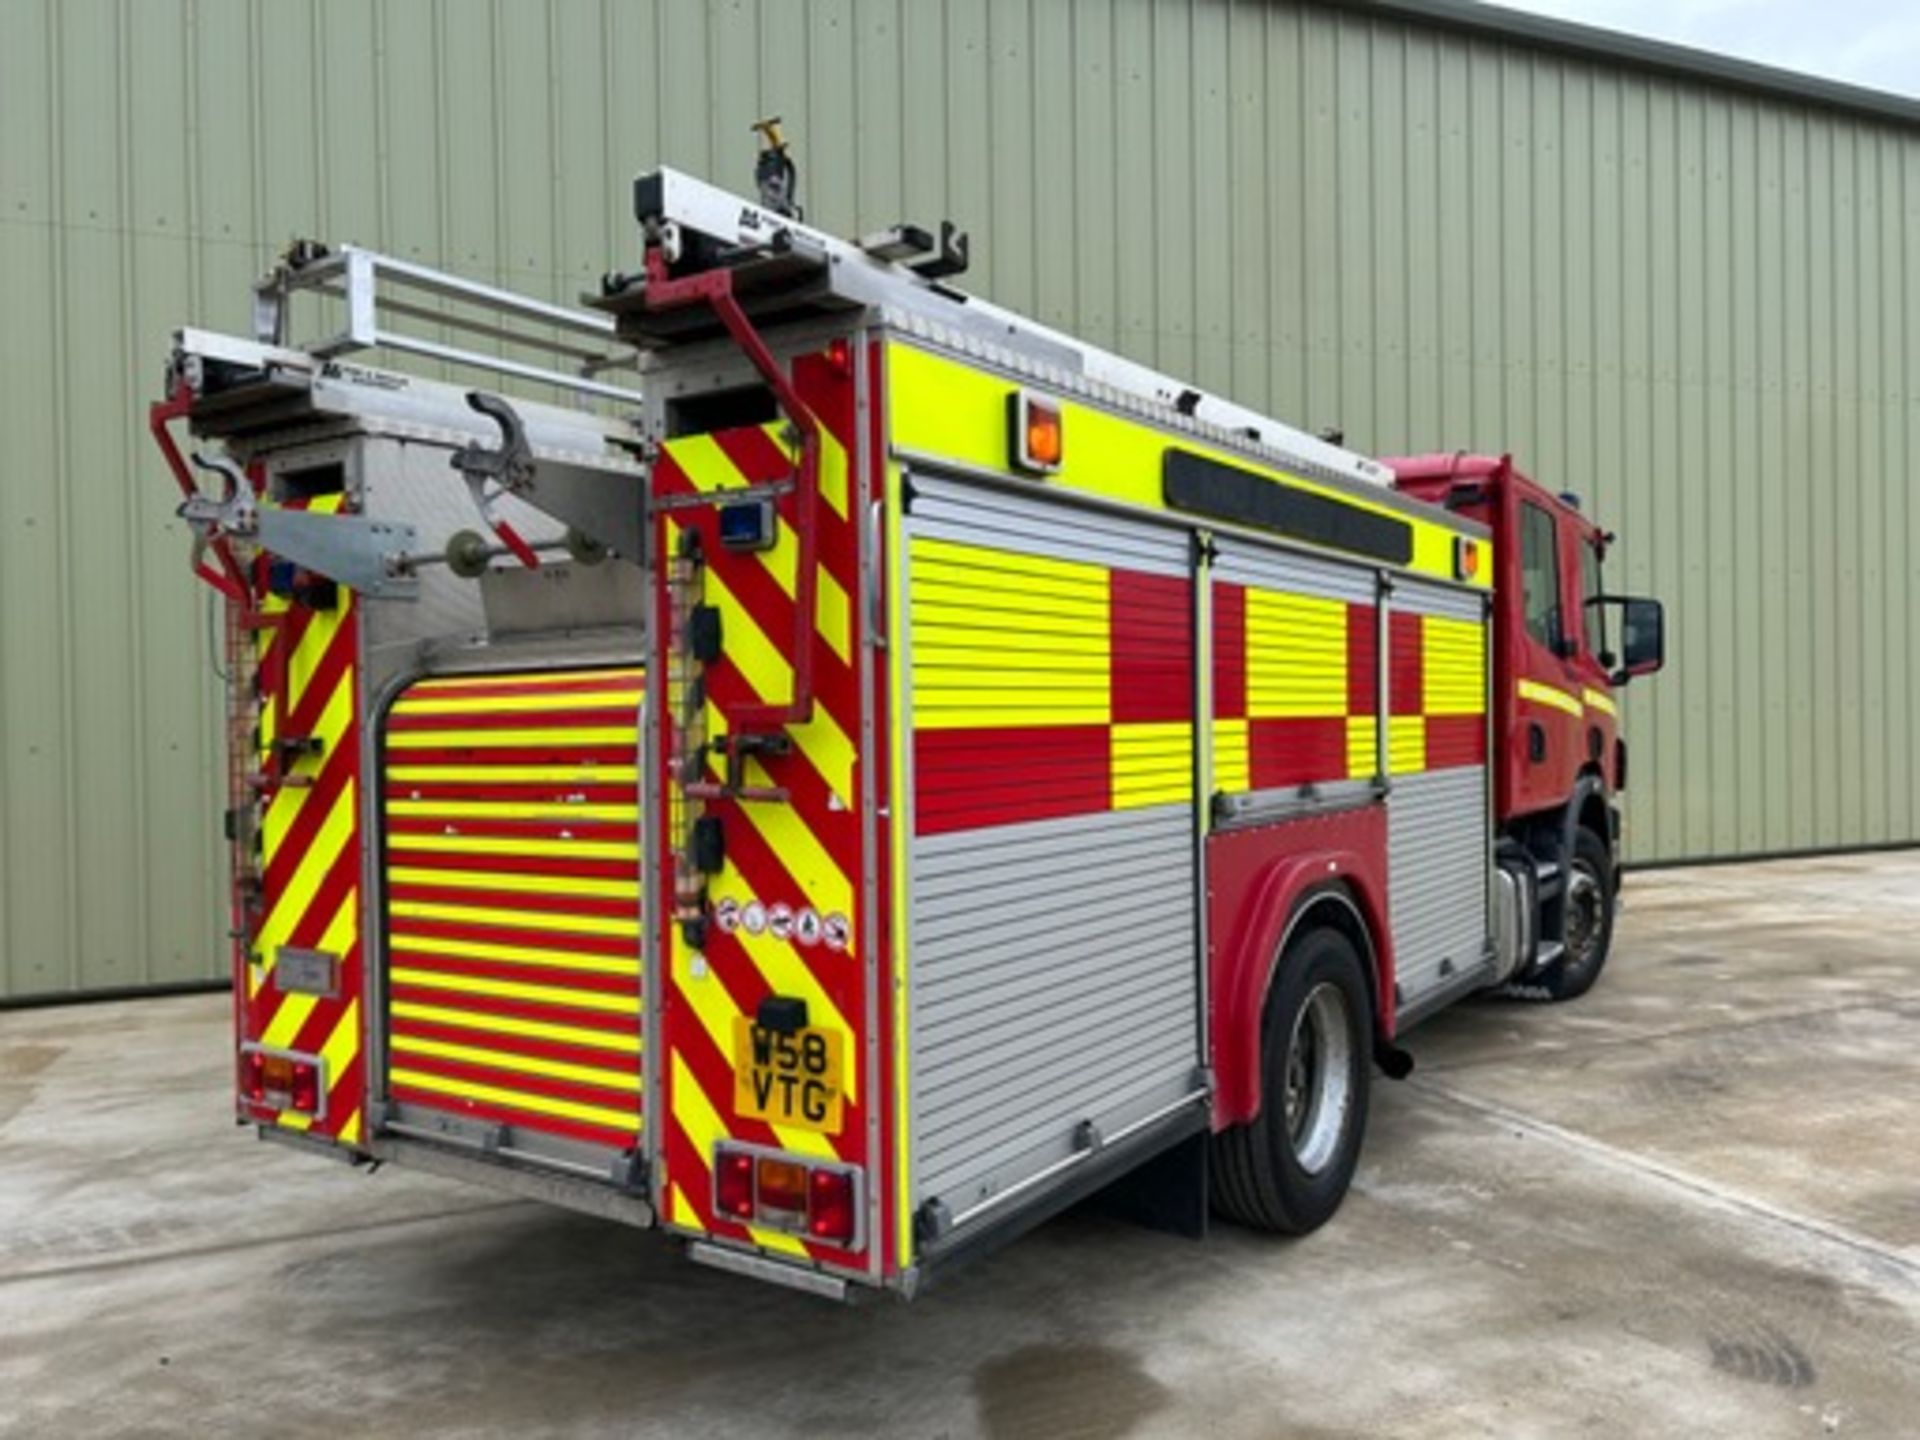 Scania Excalibur 94D 260 Fire Appliance - Image 4 of 26